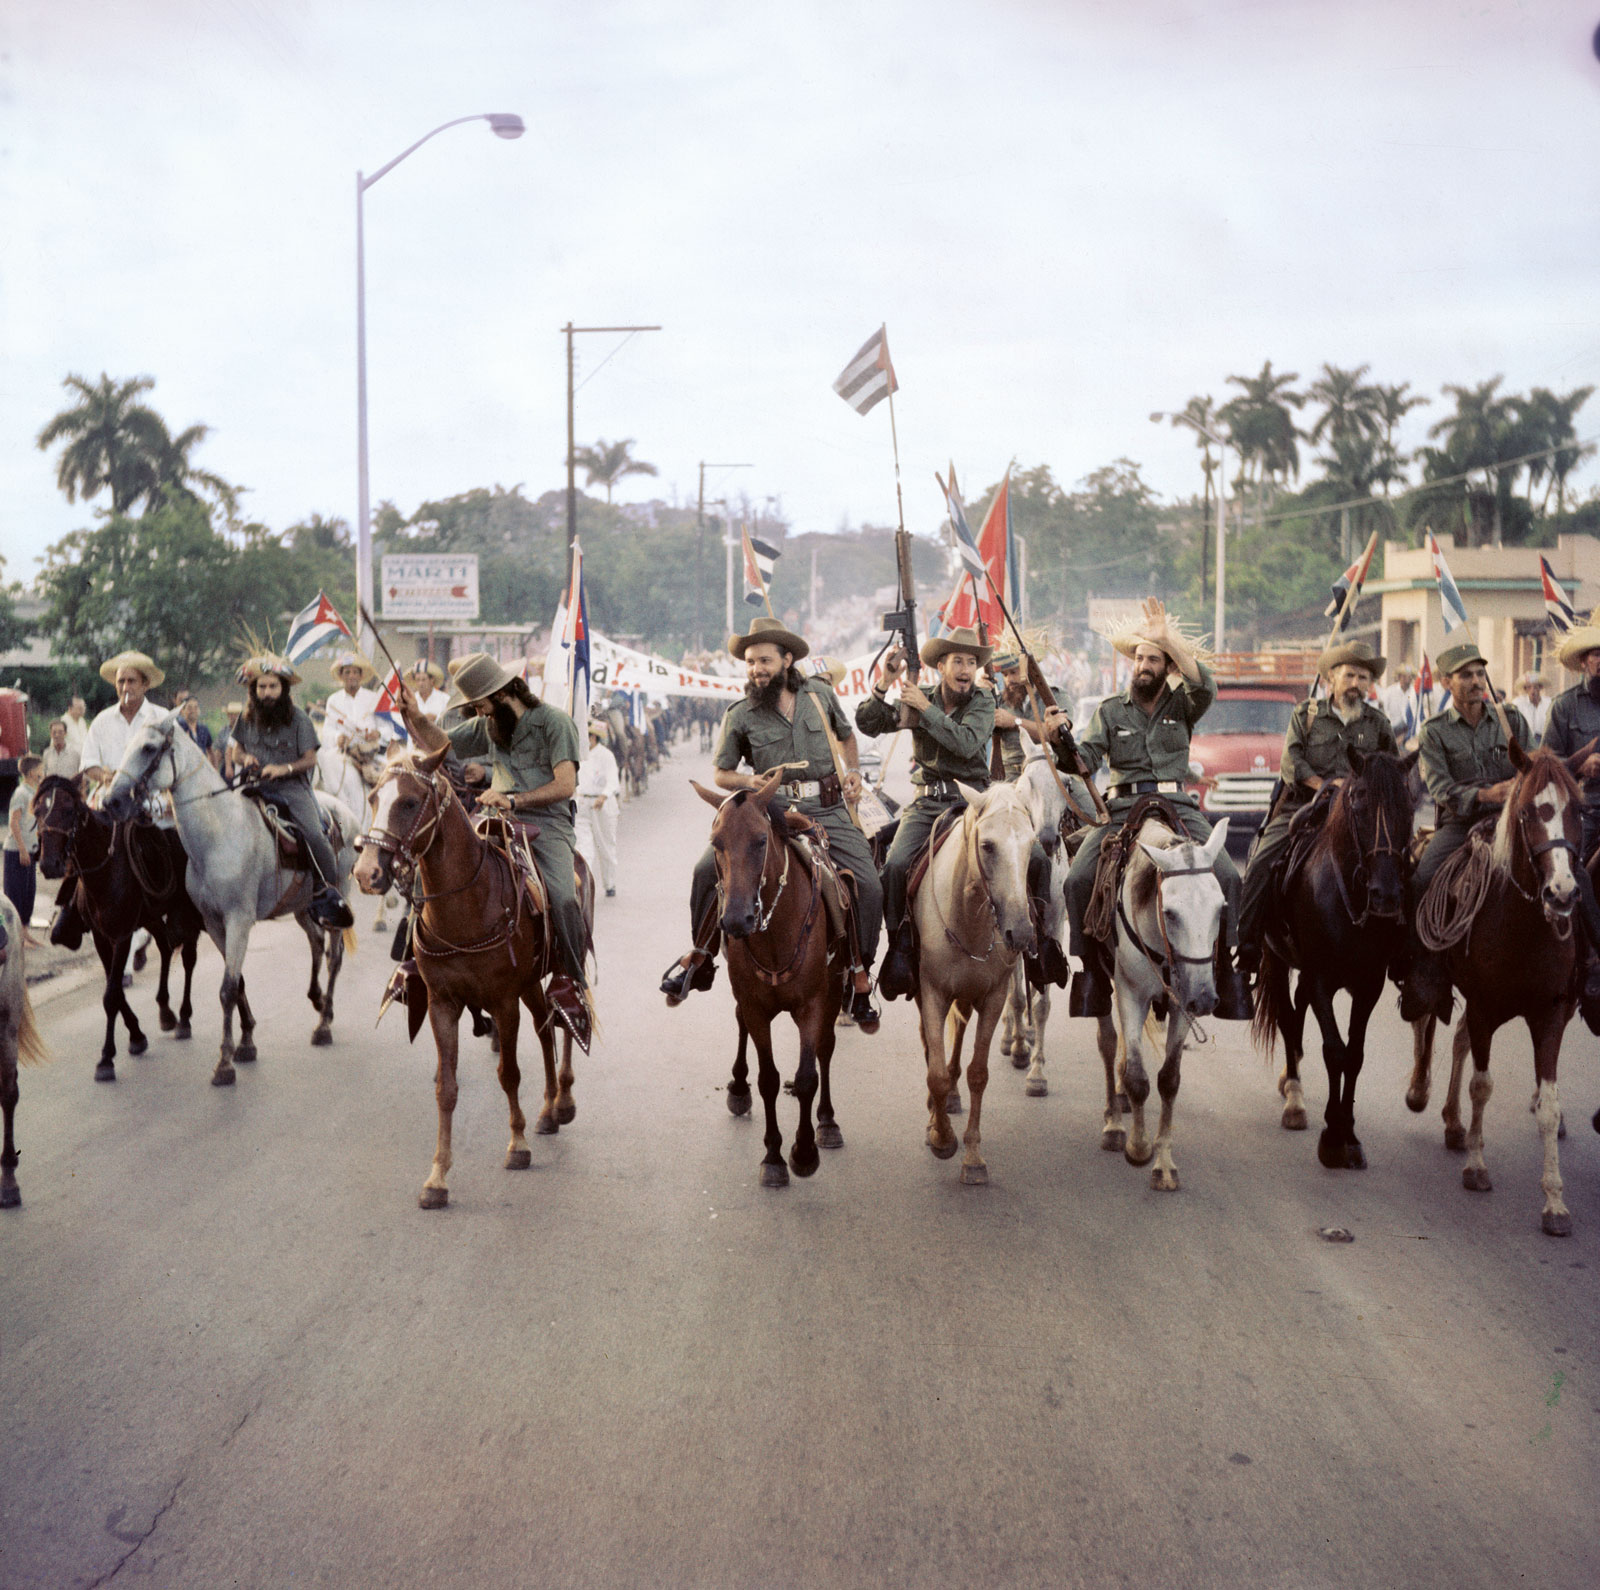 Seven years after the start of the revolution, rebel army leader Camilo Cienfuegos, center, and his fellow "barbudos" approaching Havana, 1959